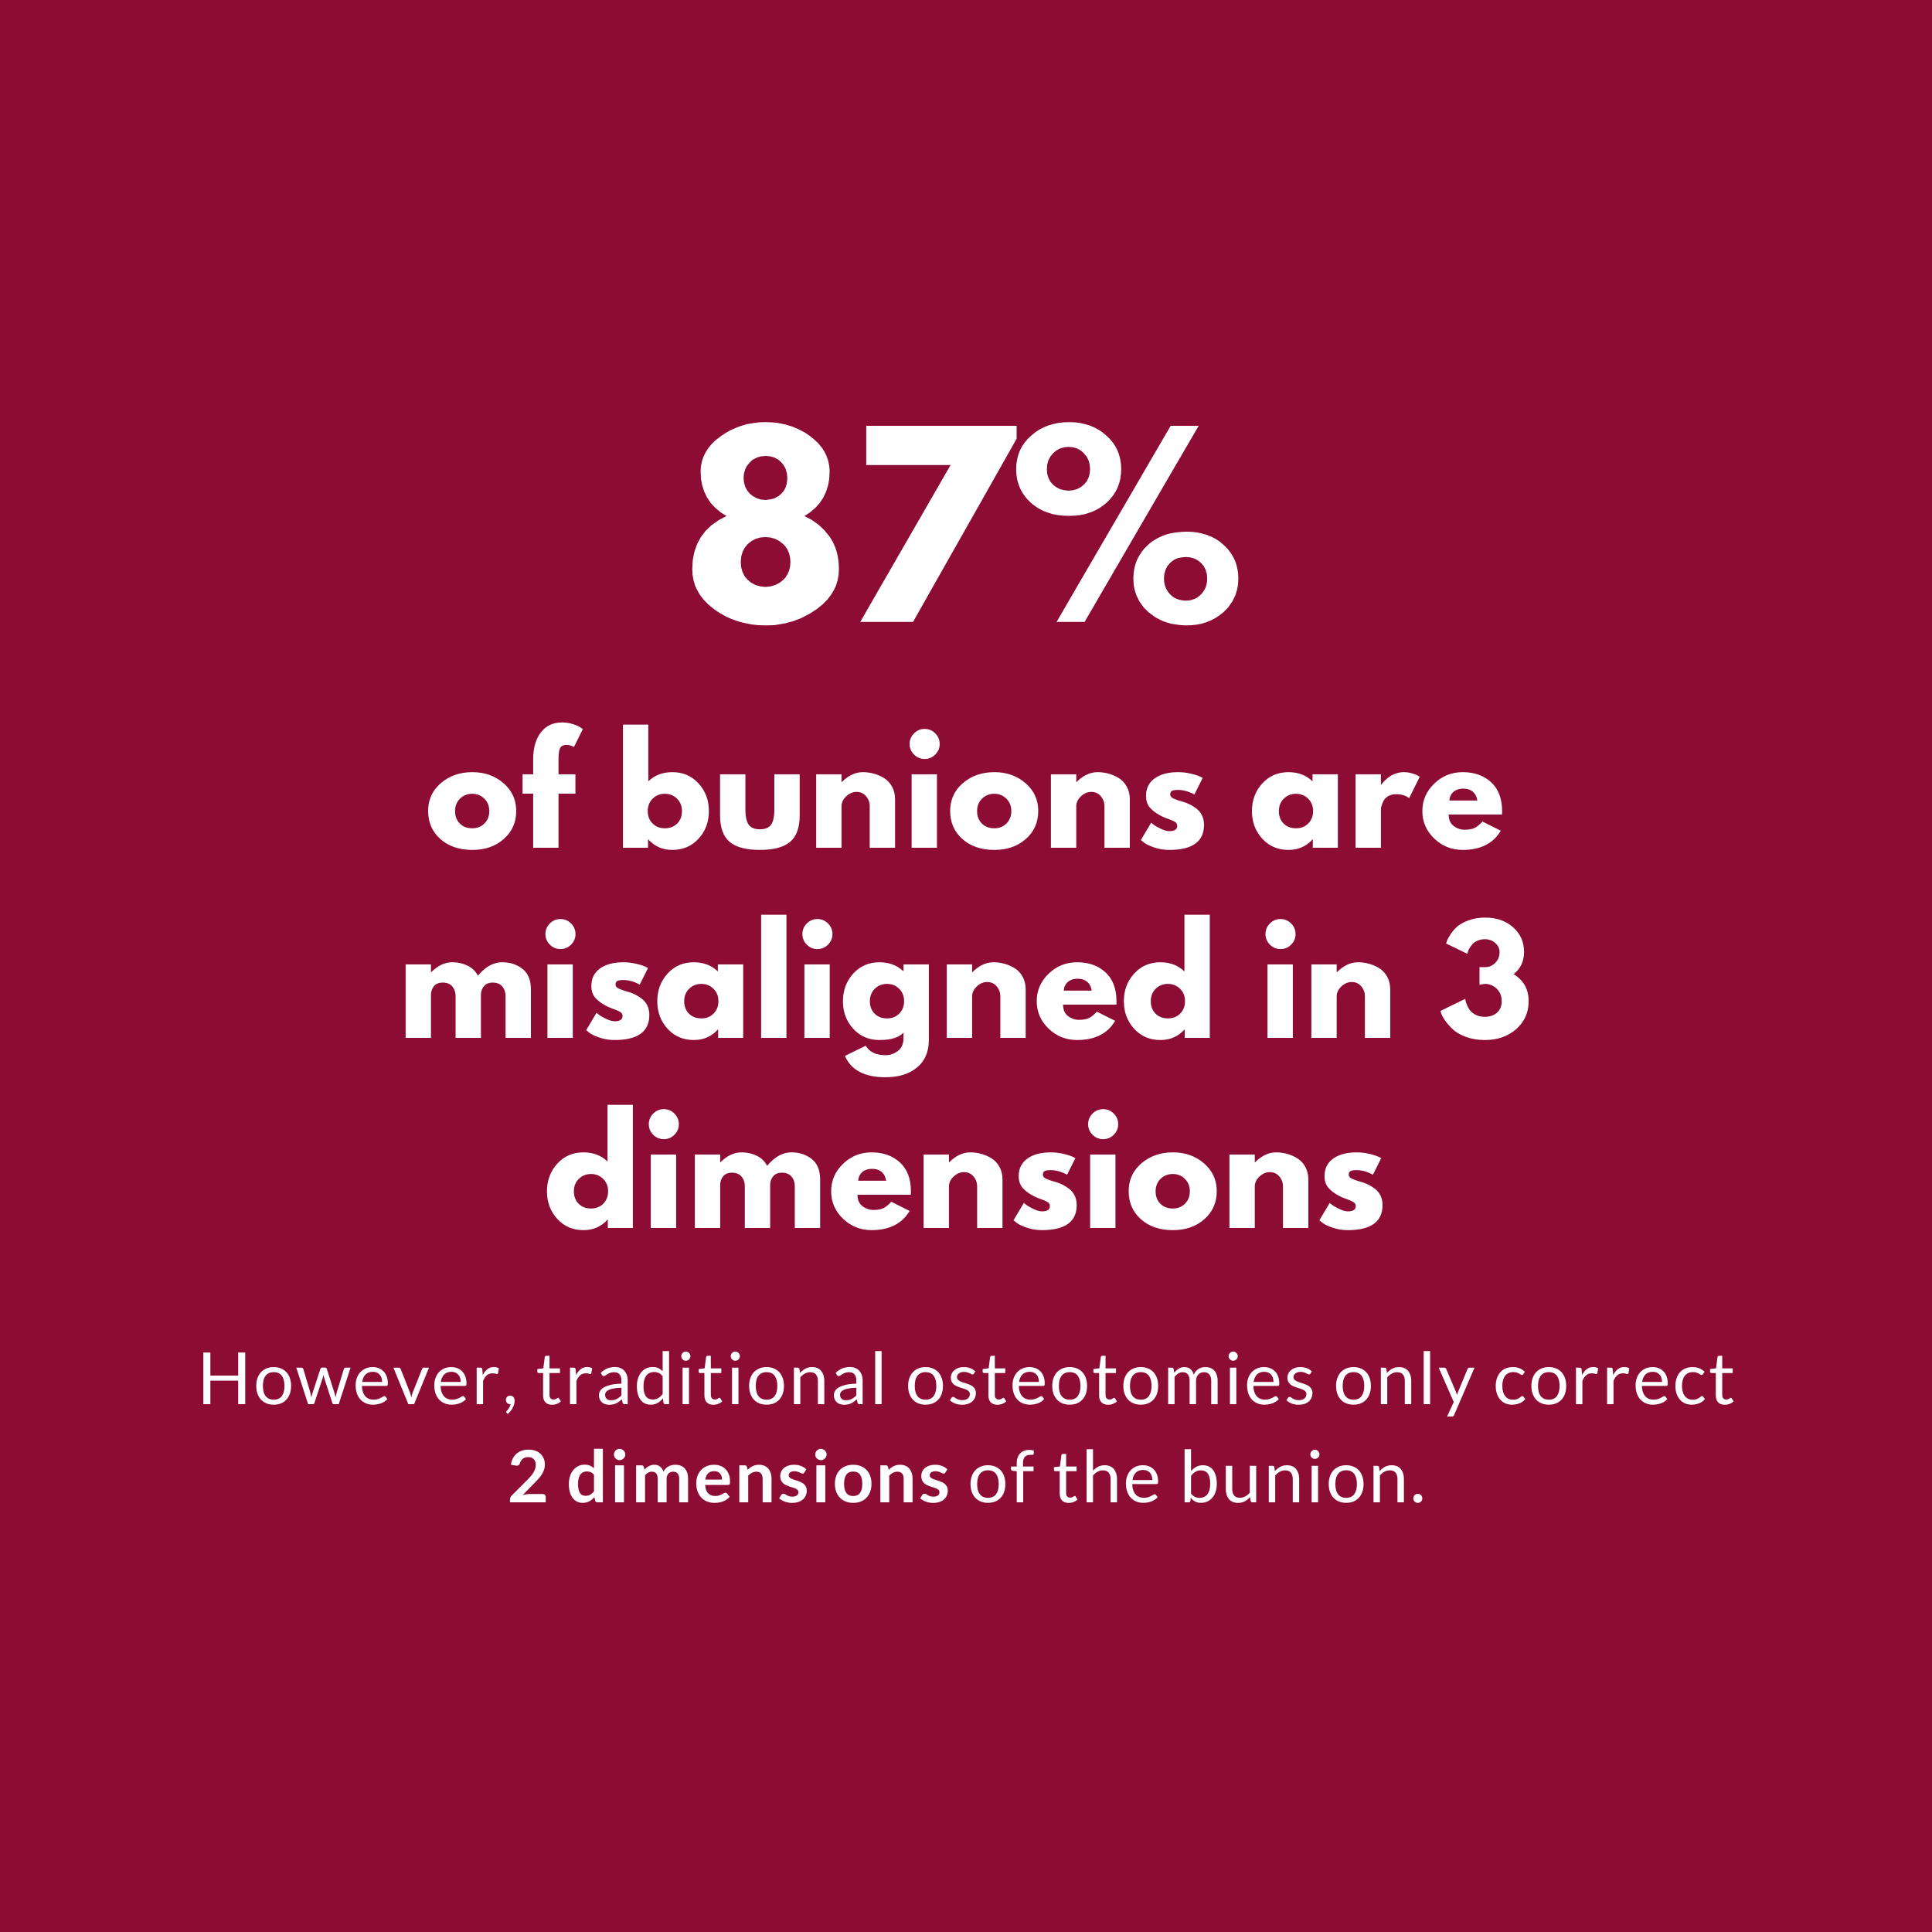 andersen-orthopedics-87-percent-bunions-are-misaligned-in-3-dimensions.png